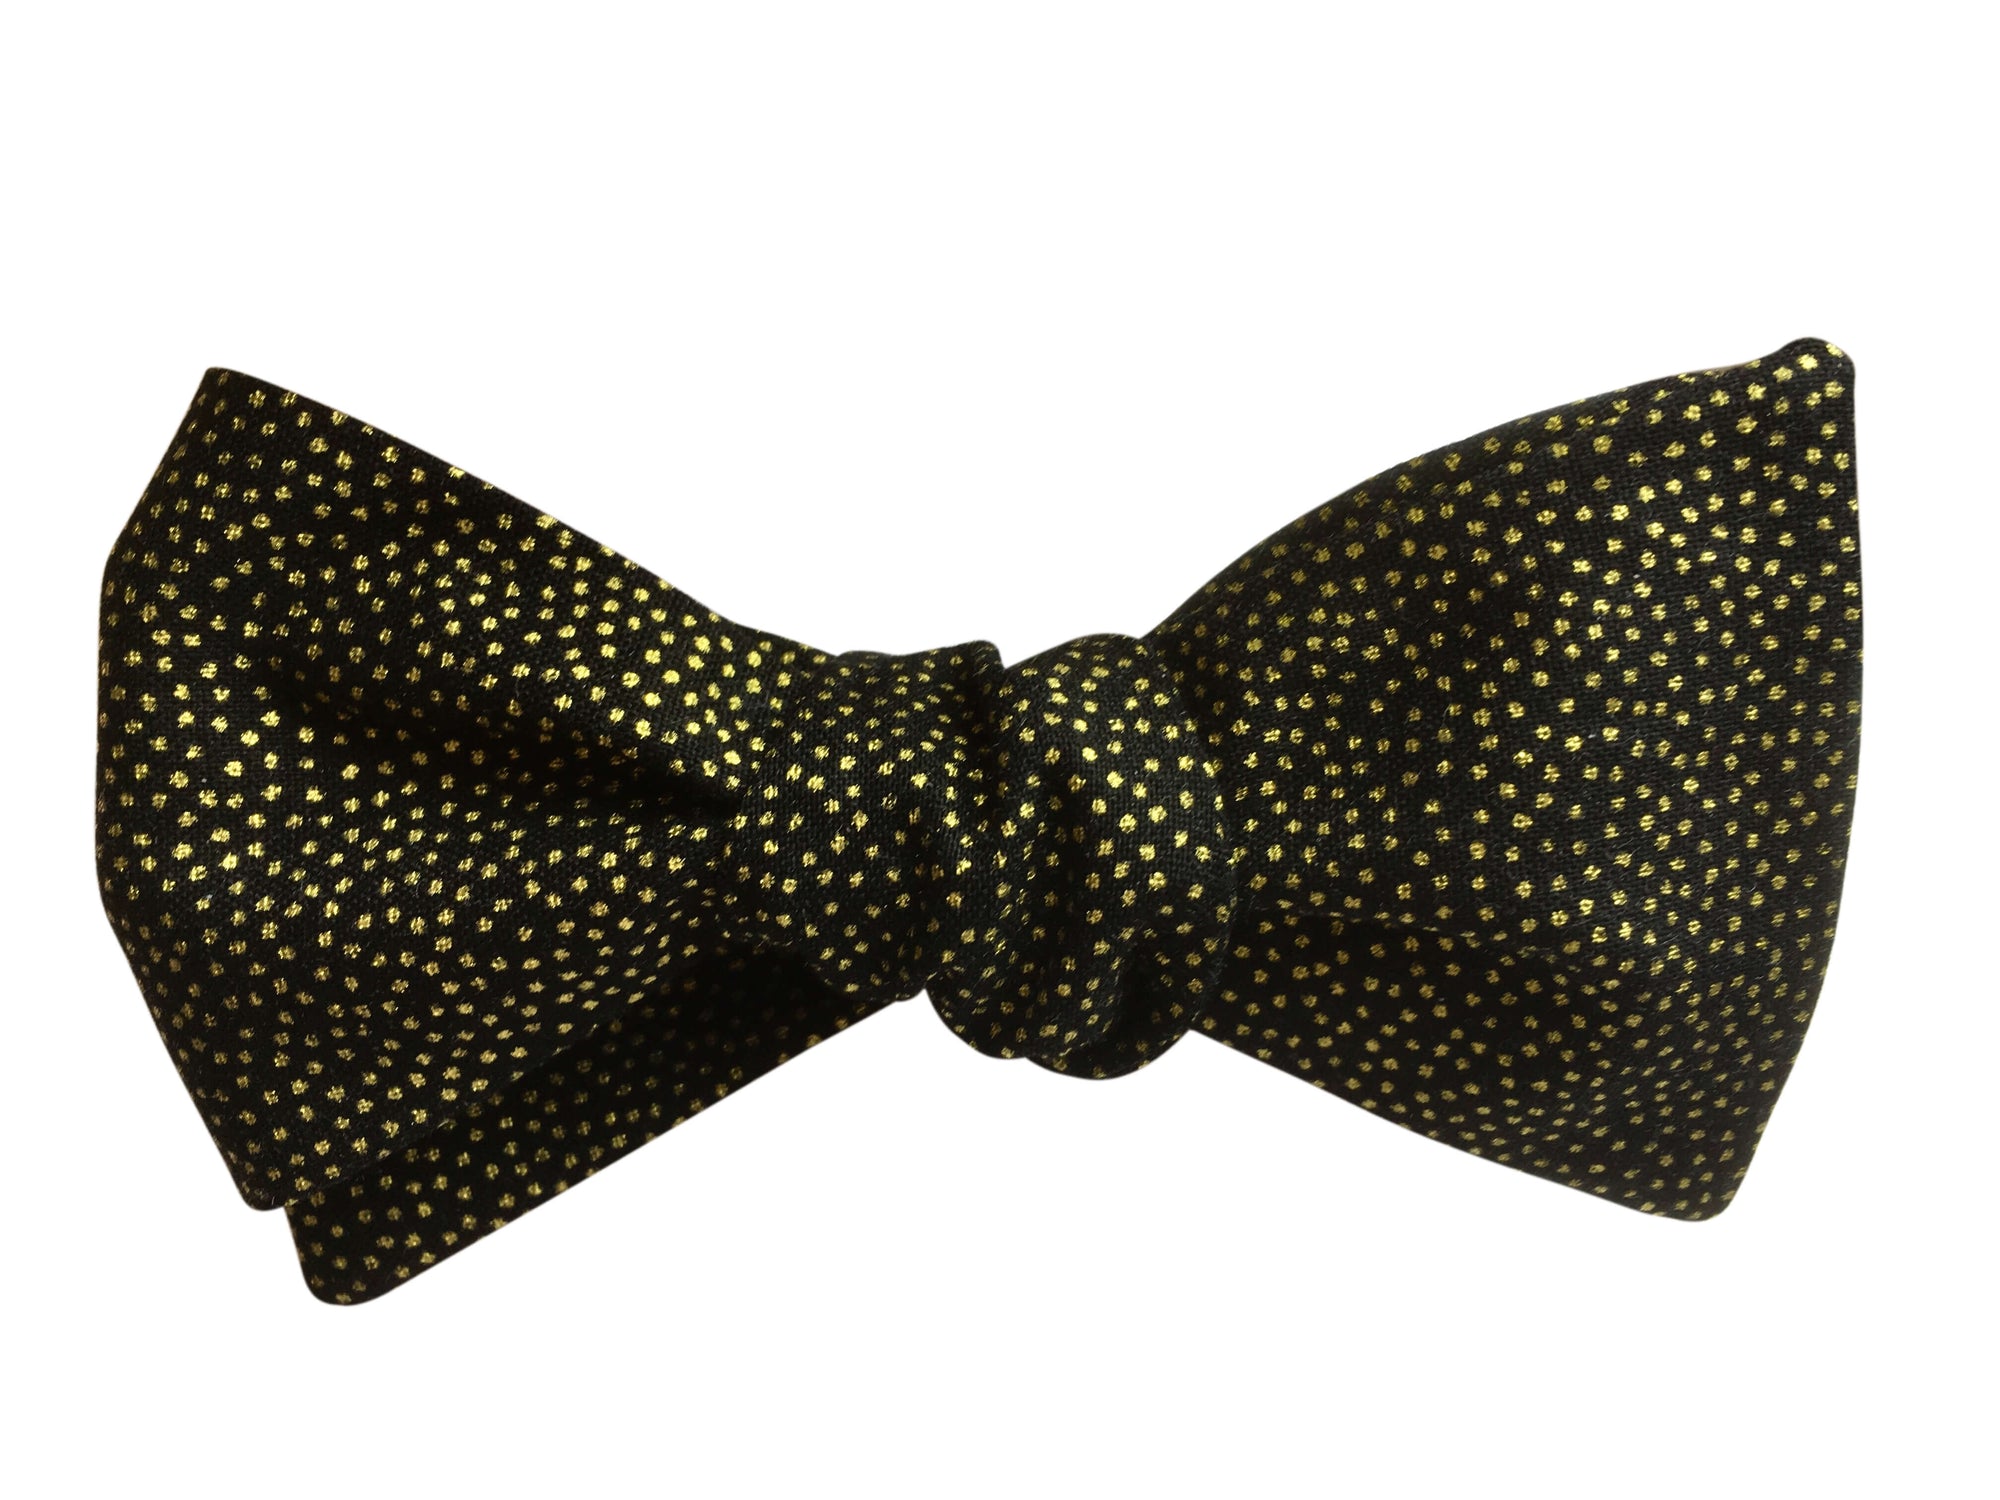 Black and Gold Doctor Who 2020 bow tie worn by Jodie Whittaker